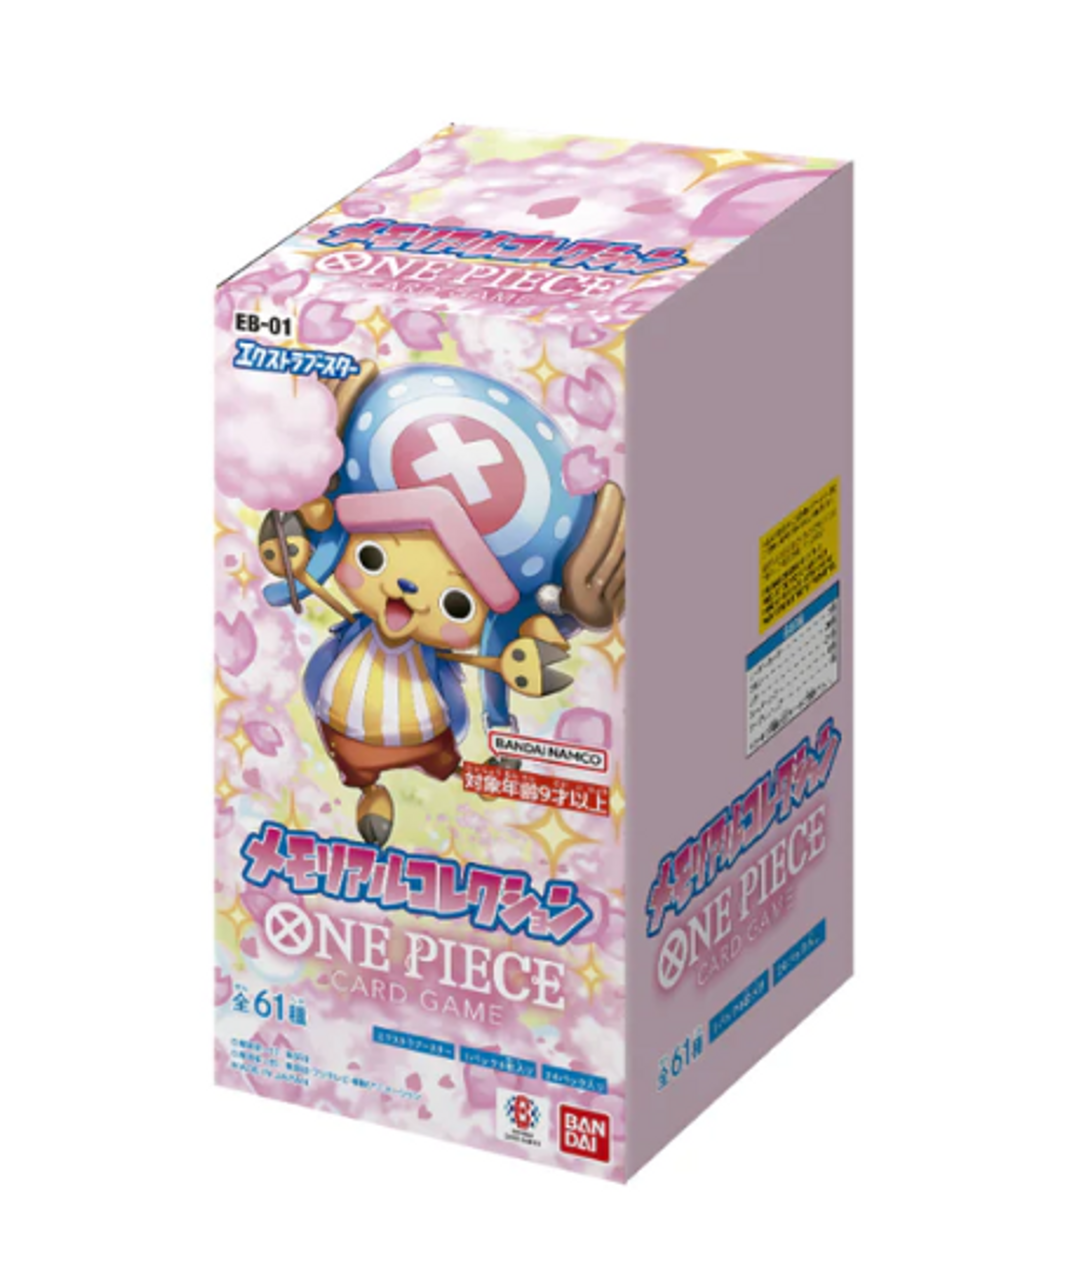 Extra Booster Memorial Collection EB-01 - Booster Box (Japanese ...